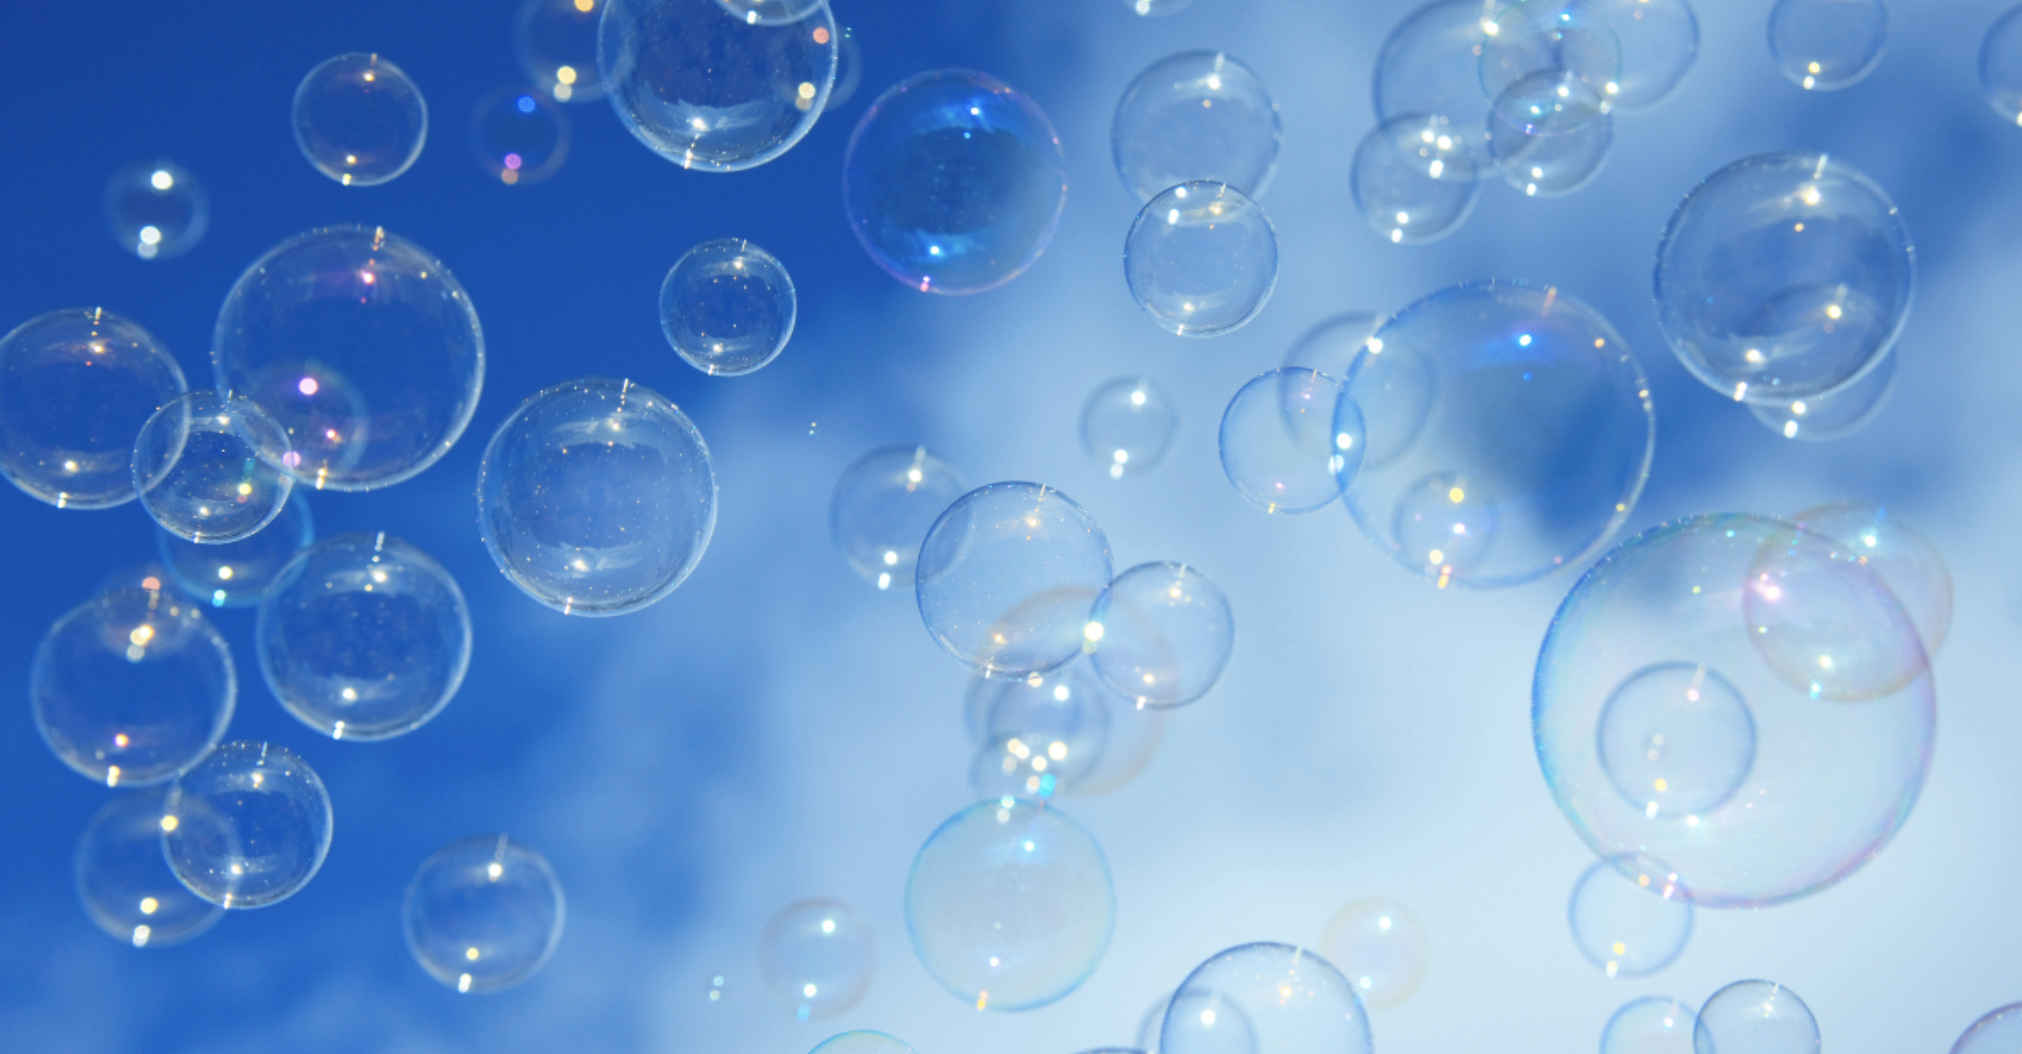 Beyond the Bubble: Share Your Story, Have an Impact